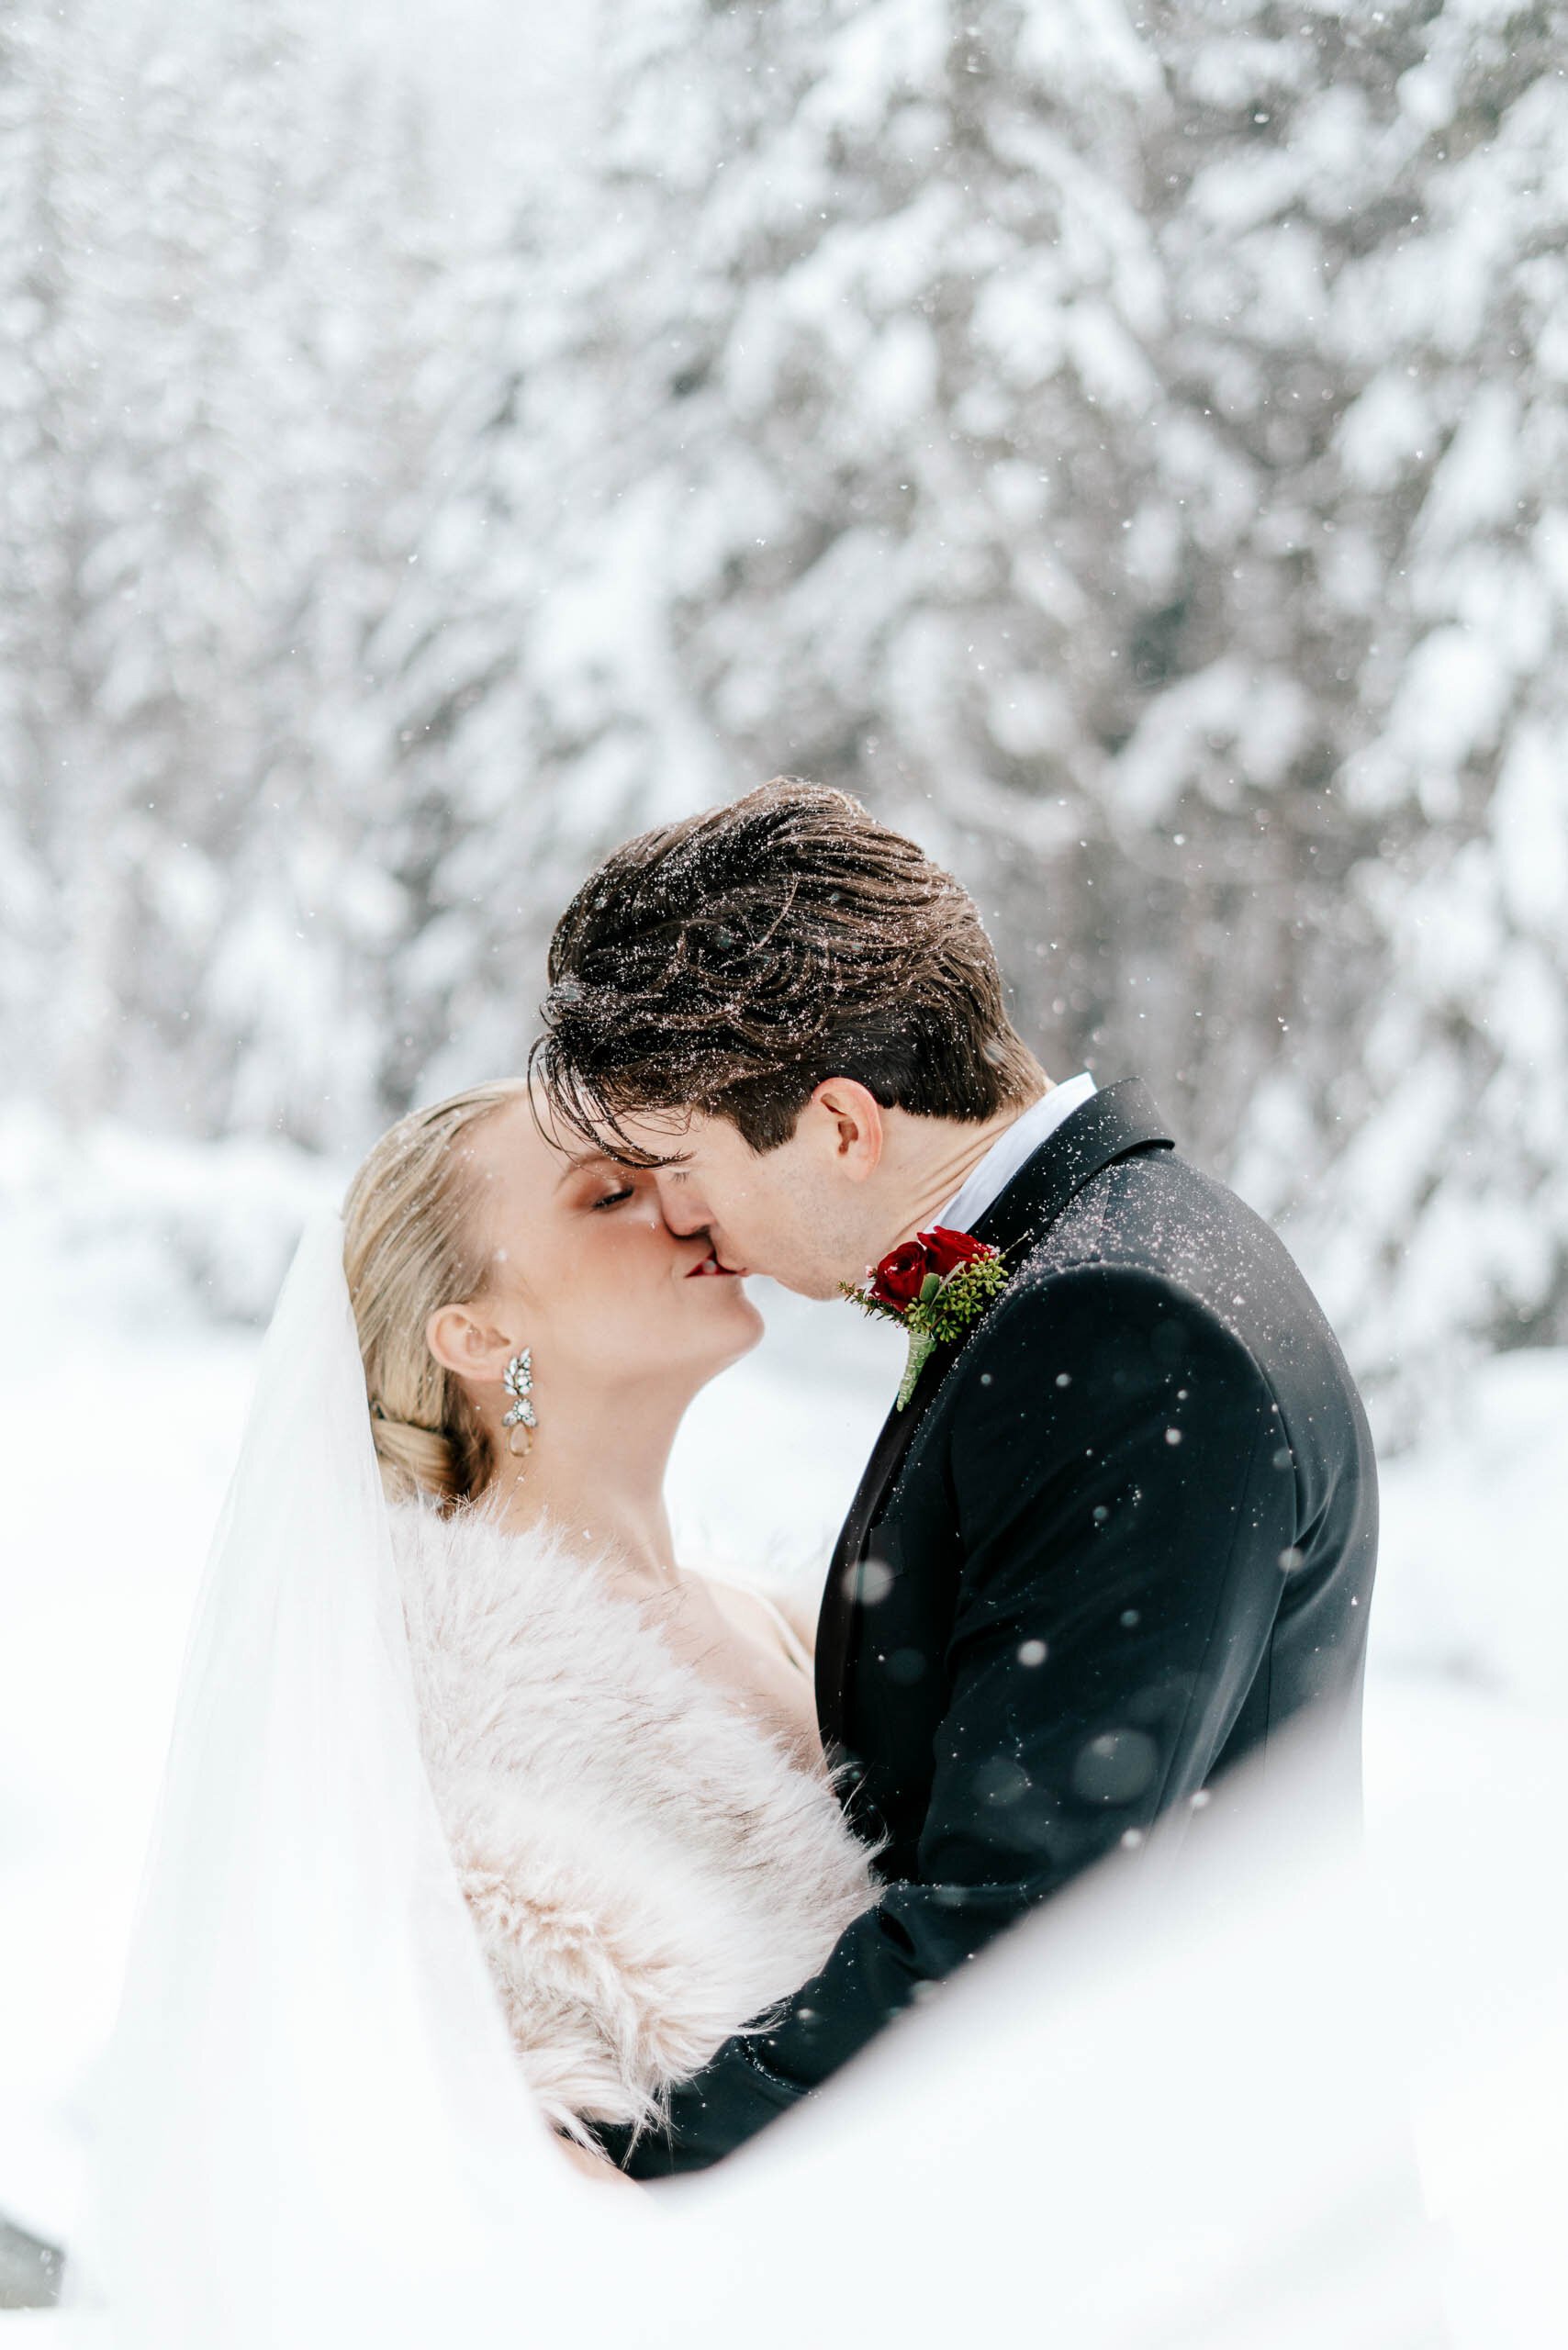 A beautiful bride and groom kiss in the snow as the snow falls around them in Whistler BC.